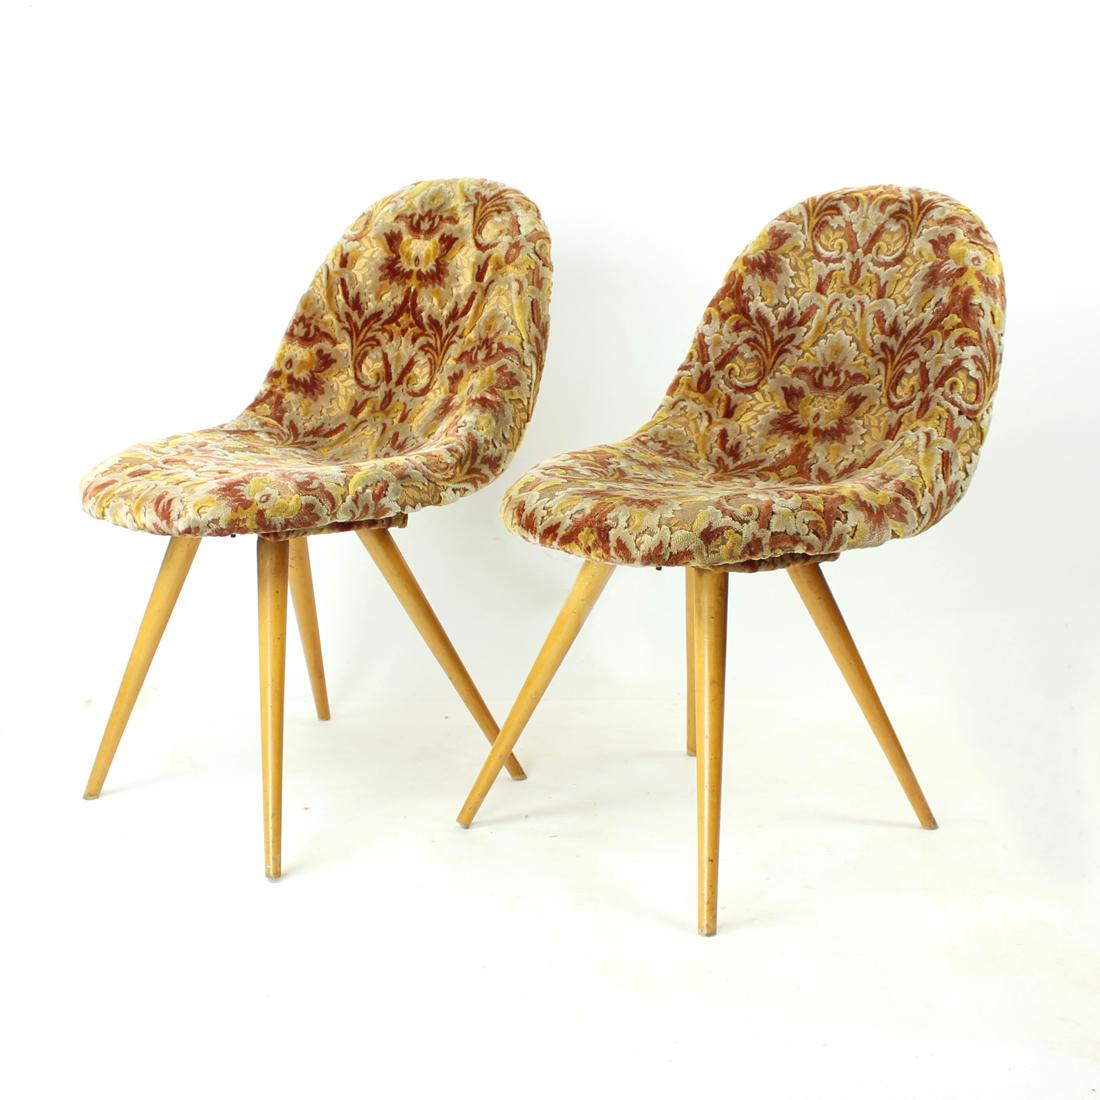 Mid-Century Modern Pair Of Midcentury Shell Chairs By Miroslav Navratil, Czechoslovakia 1960s For Sale